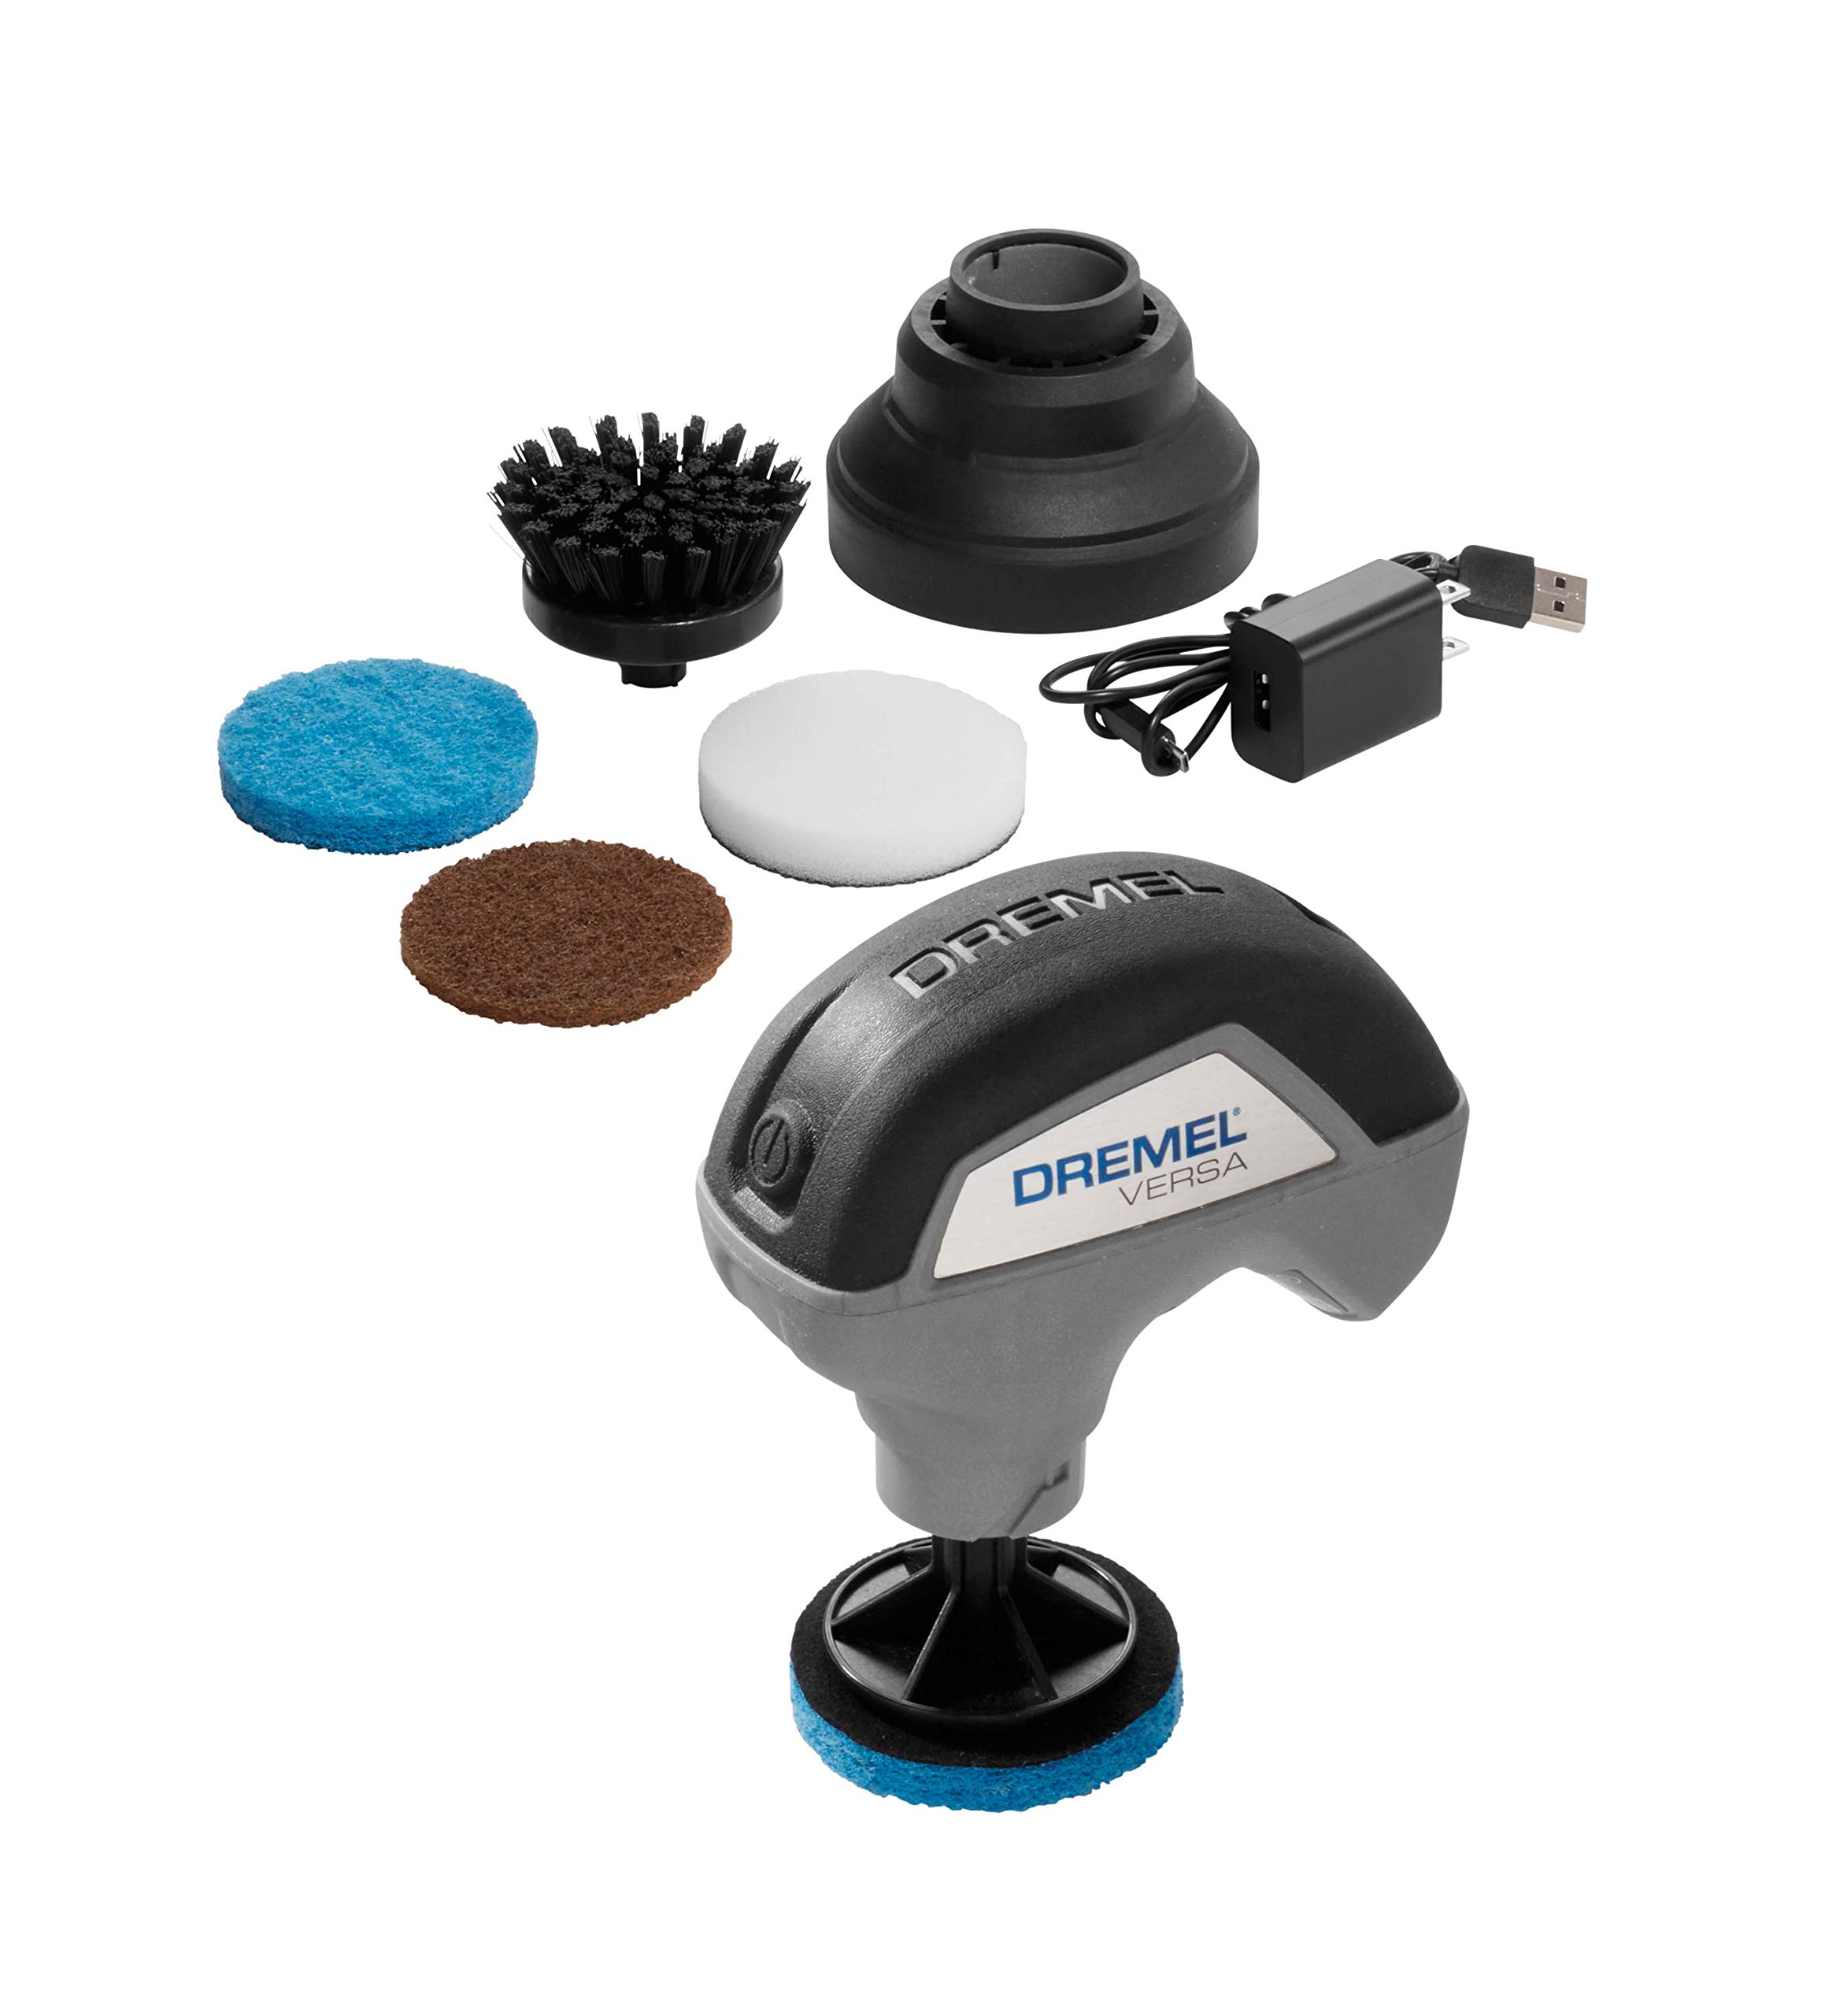 Dremel Versa Cleaning Tool- Grout Brush- Bathroom Shower Scrub- Kitchen &  Bathtub Cleaner- Power Scrubber for Tile, Pans, Stoves, Tubs, Sinks Auto, &  Grills- PC10-02 Versa Kit